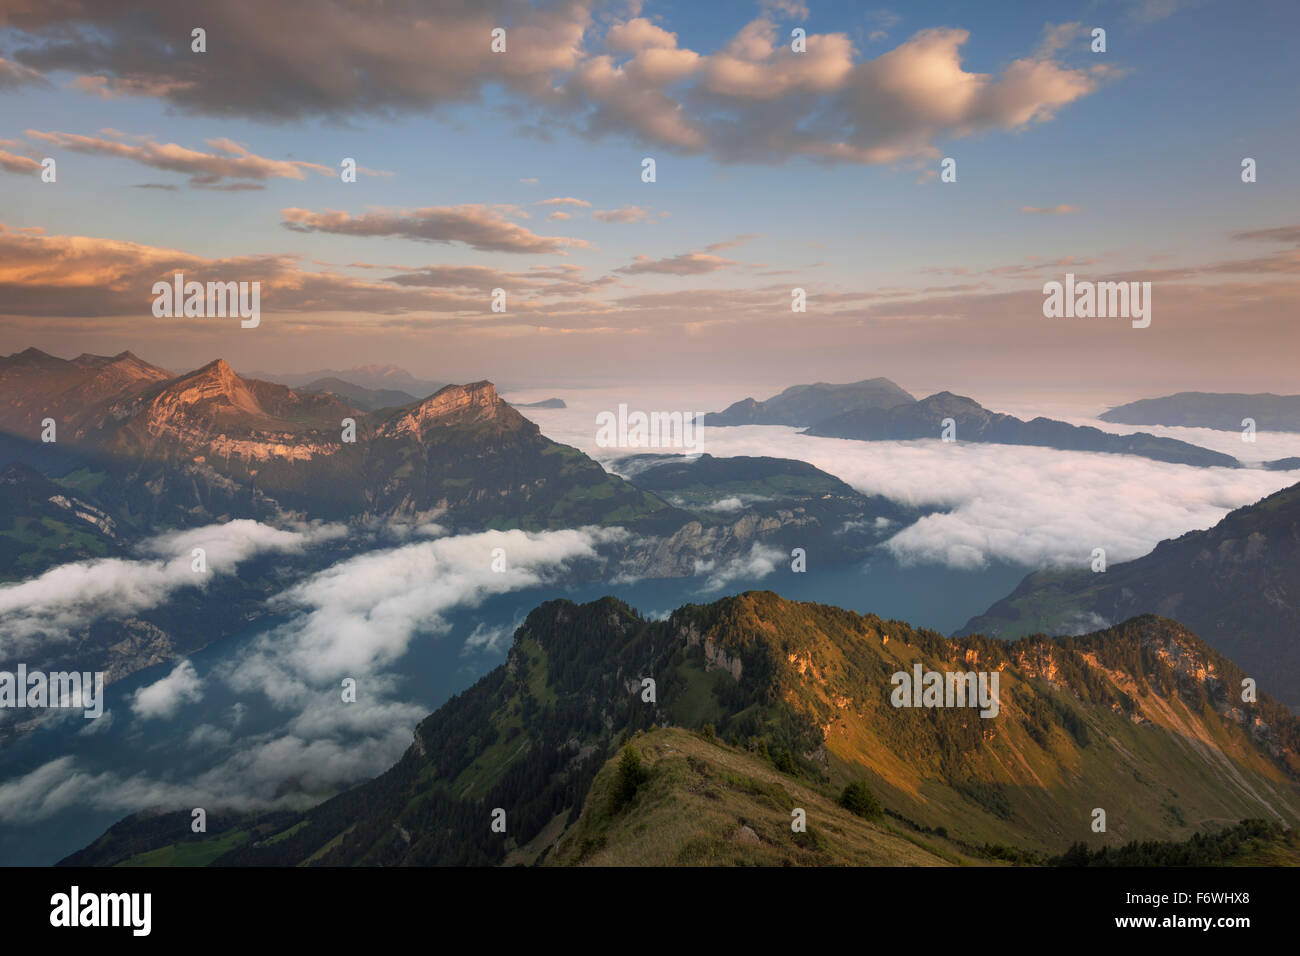 View from Rophaien to Lake Lucerne and the surrounding peaks in the morning, Canton of Uri, Switzerland Stock Photo